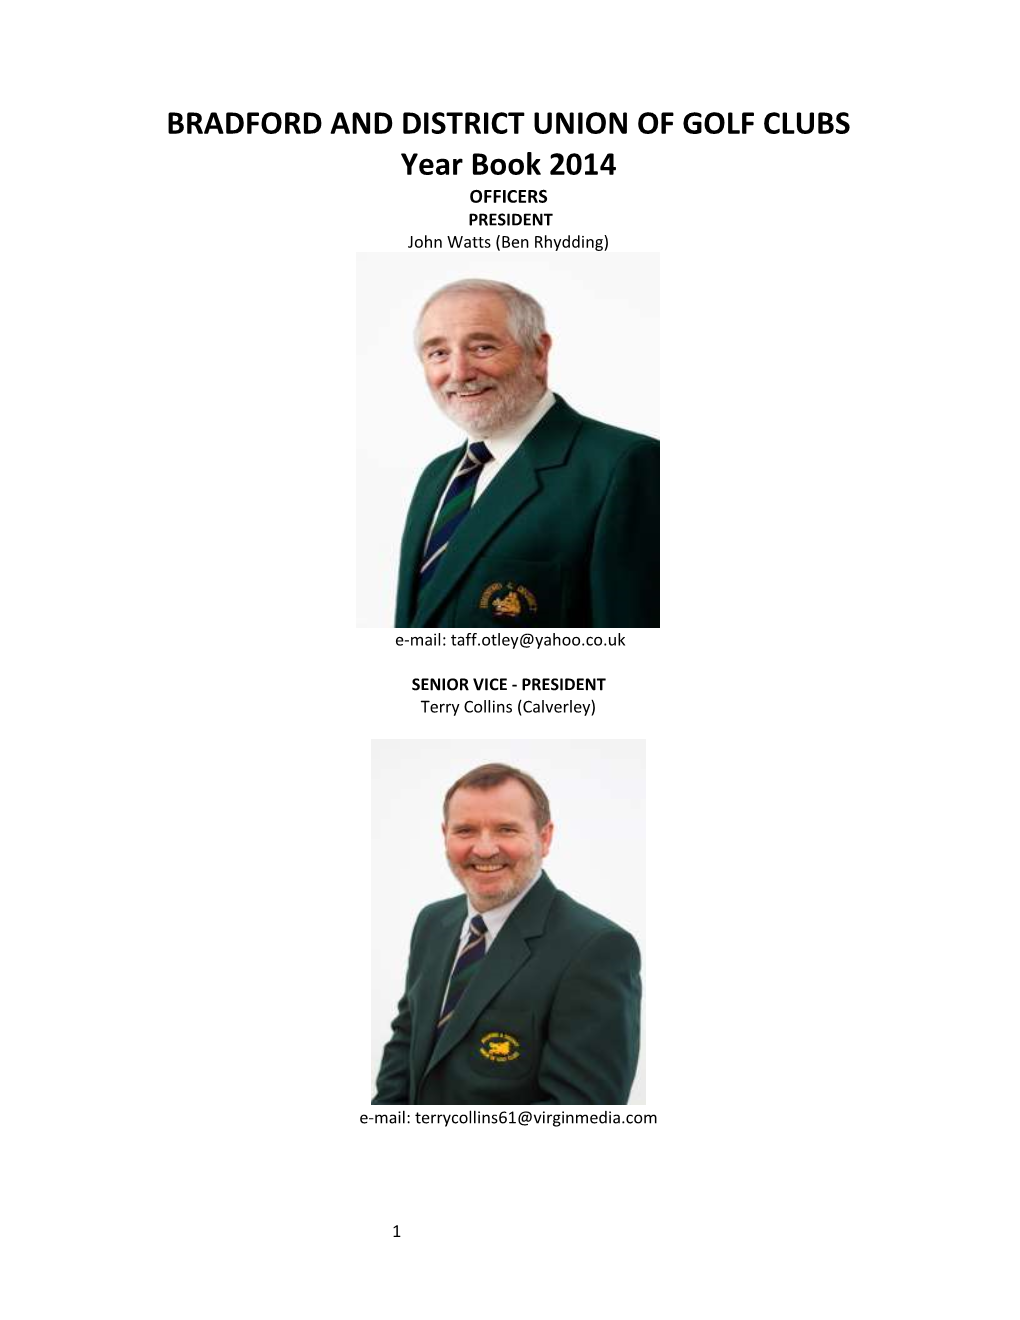 BRADFORD and DISTRICT UNION of GOLF CLUBS Year Book 2014 OFFICERS PRESIDENT John Watts (Ben Rhydding)